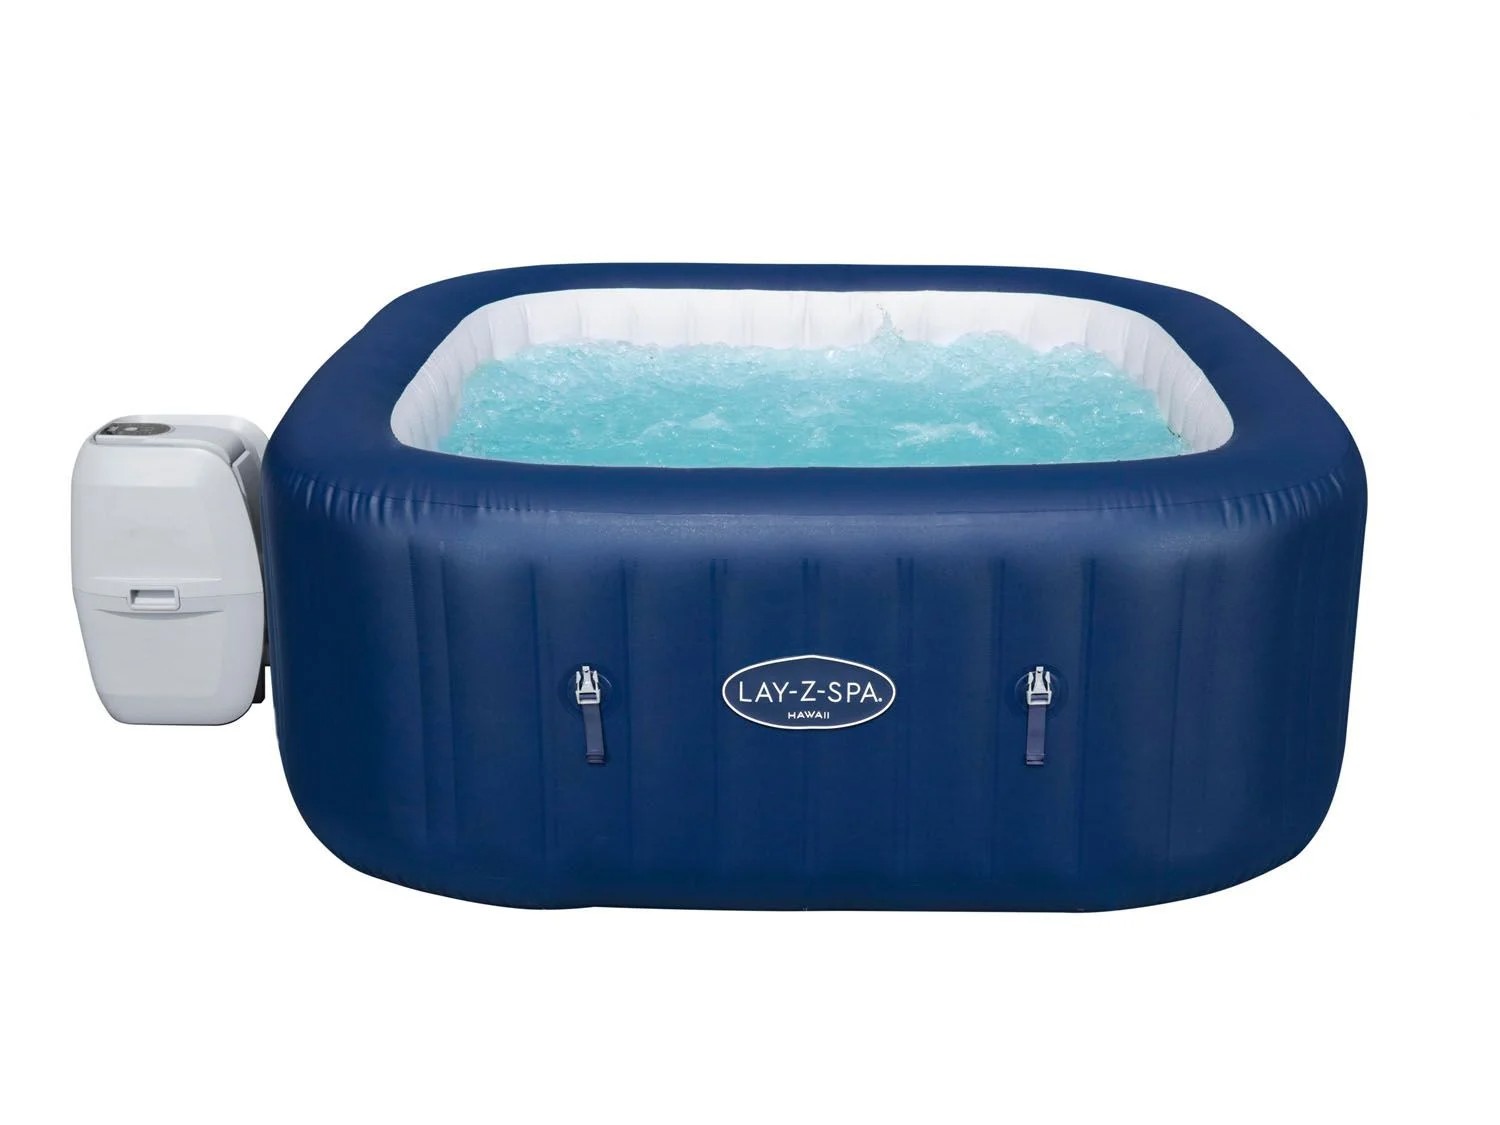 jacuzzi luxe lidl